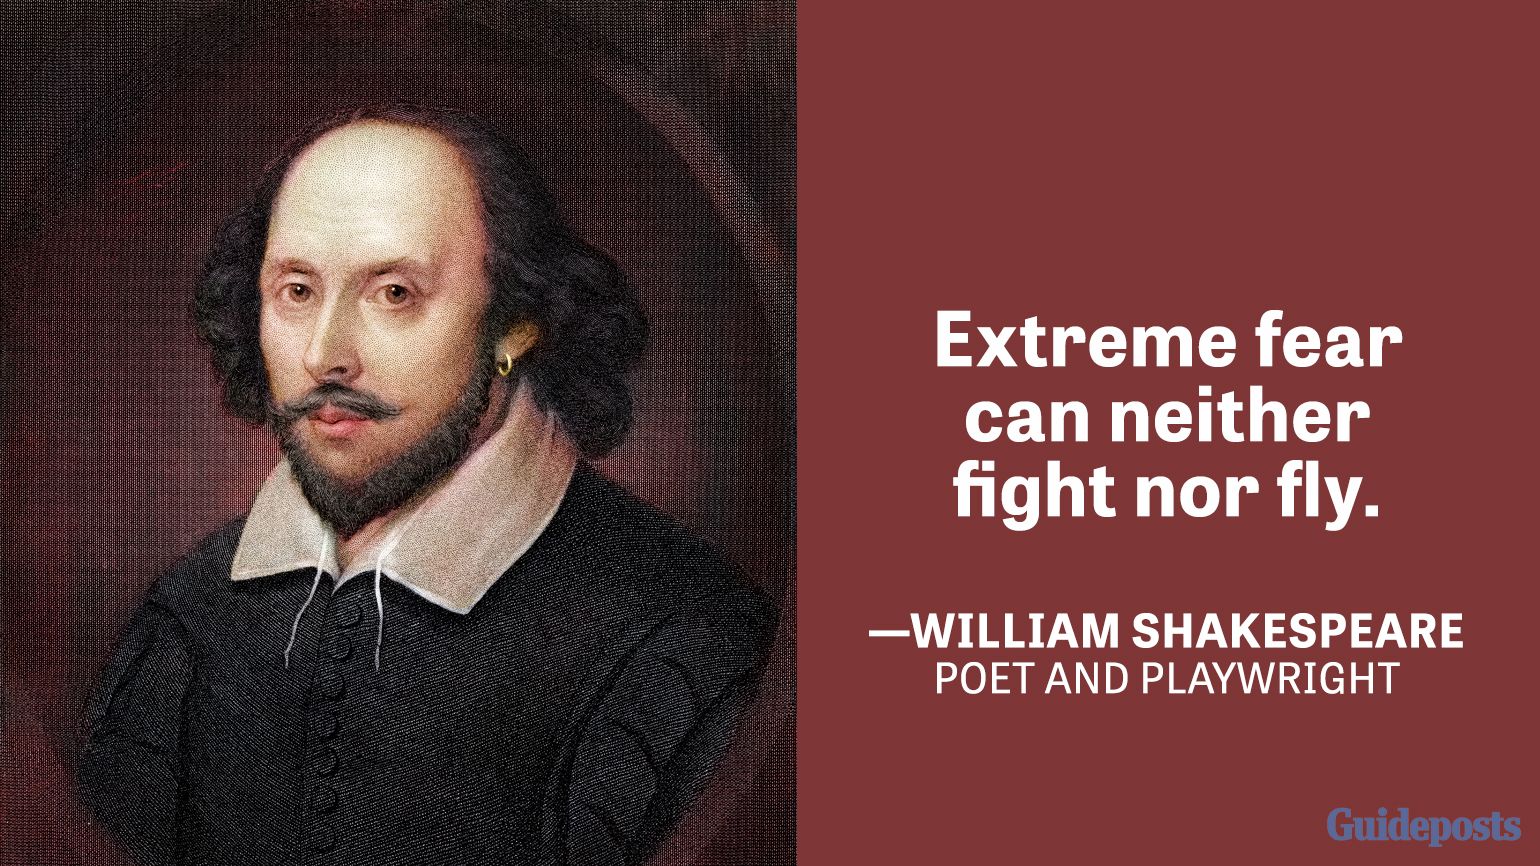 Extreme fear can neither fight nor fly. —William Shakespeare, Poet and playwright